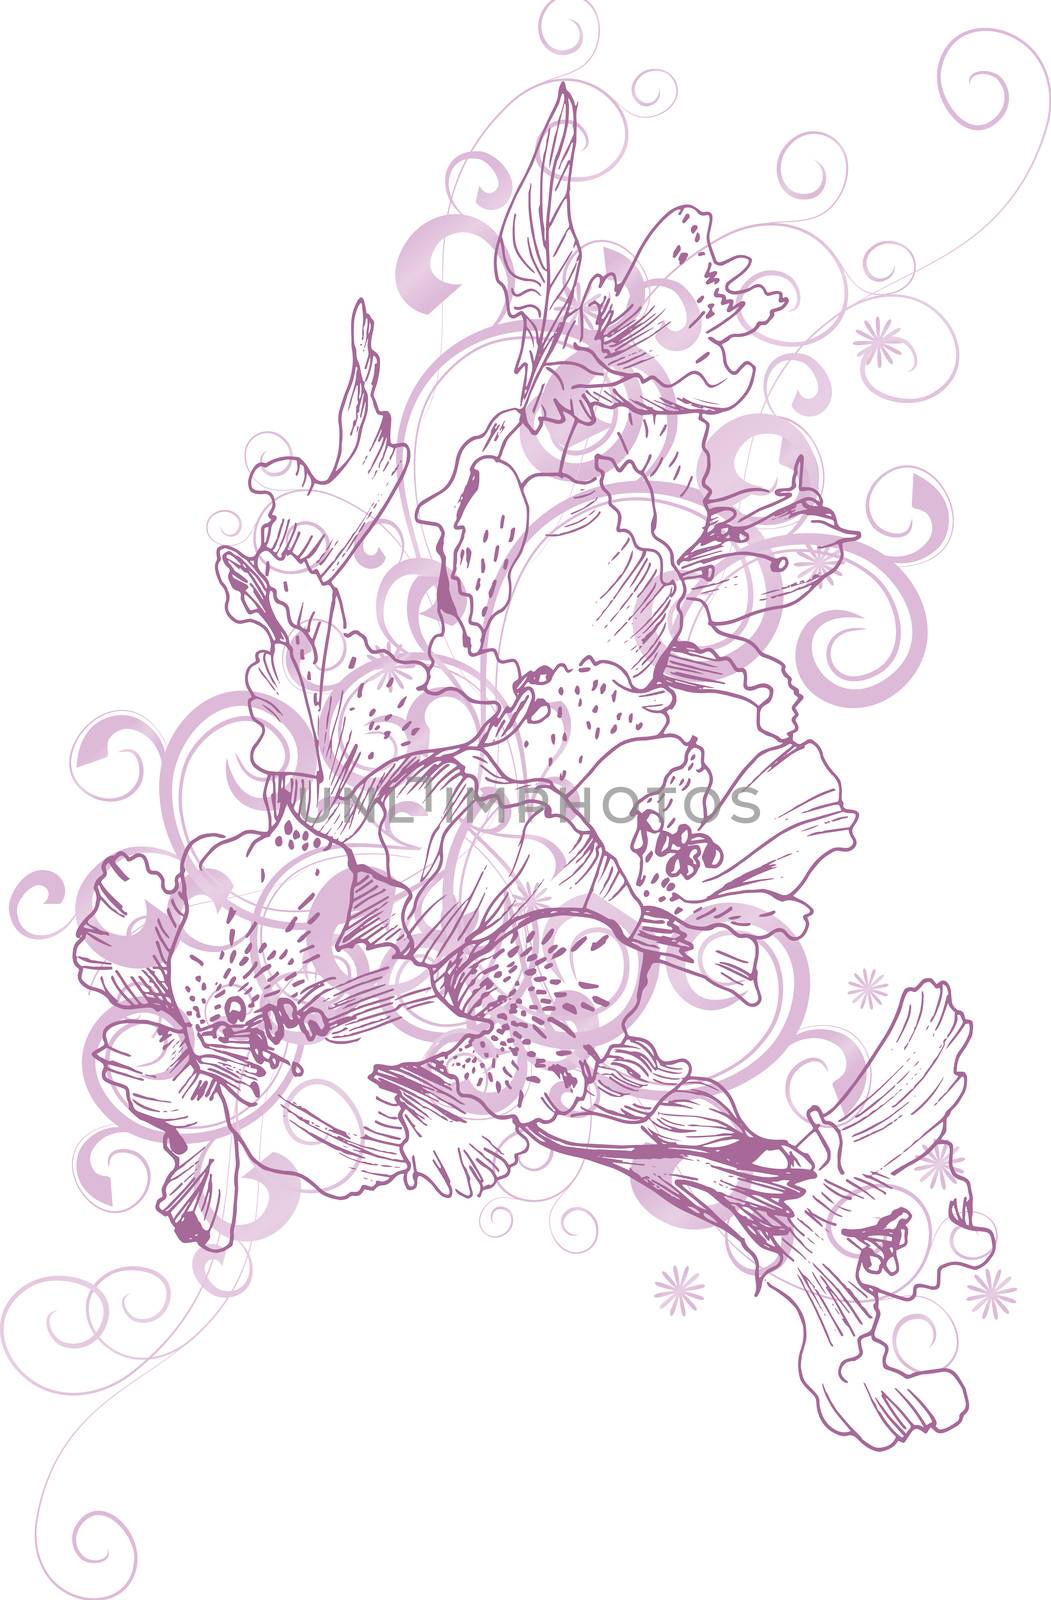 pink hand drawn flowers and decorative curves by CherJu